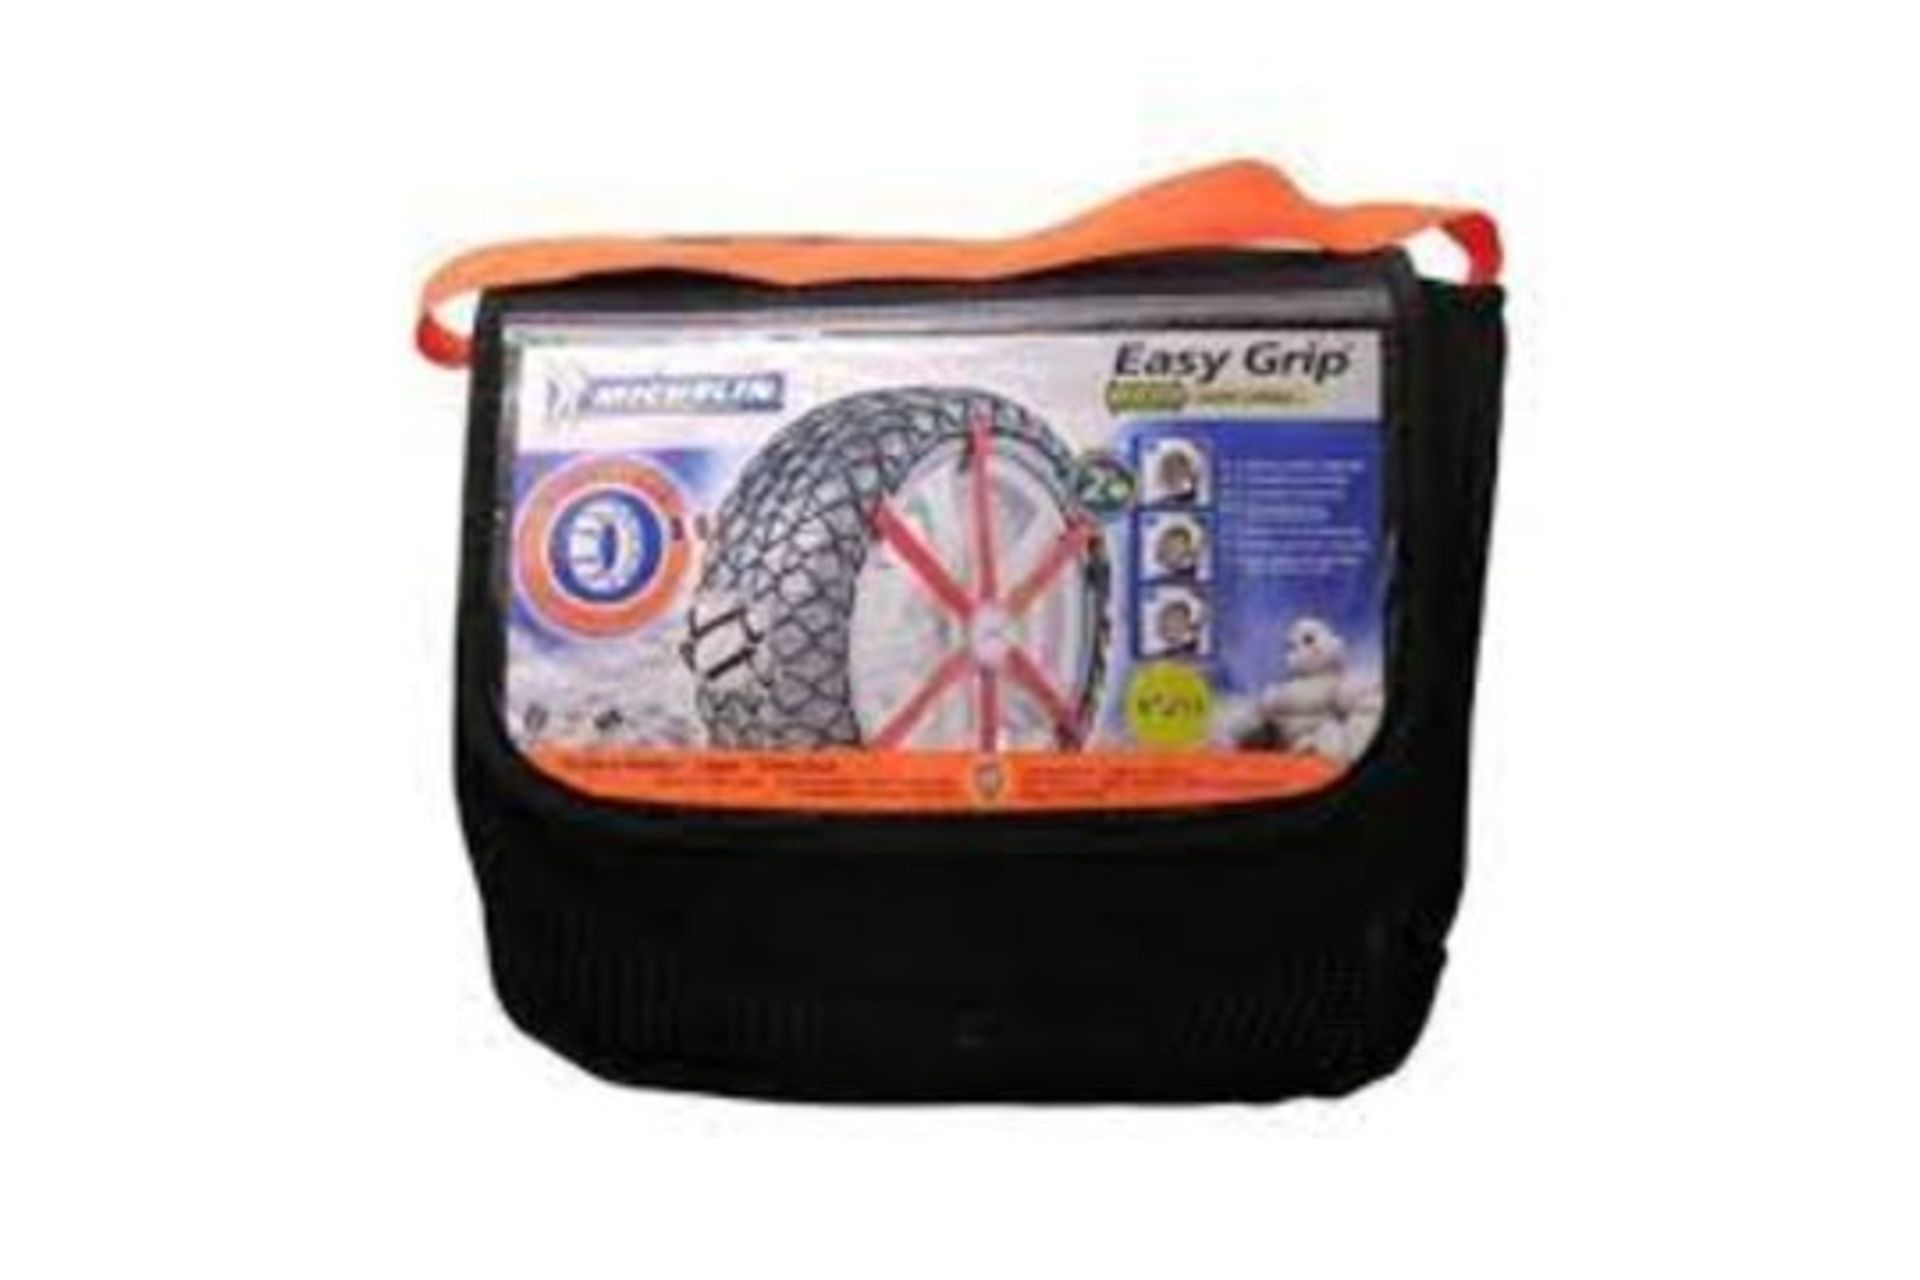 4 X NEW PACKAGED SETS OF Michelin 92302 Textile snow chains Easy Grip J11, ABS and ESP compatible,